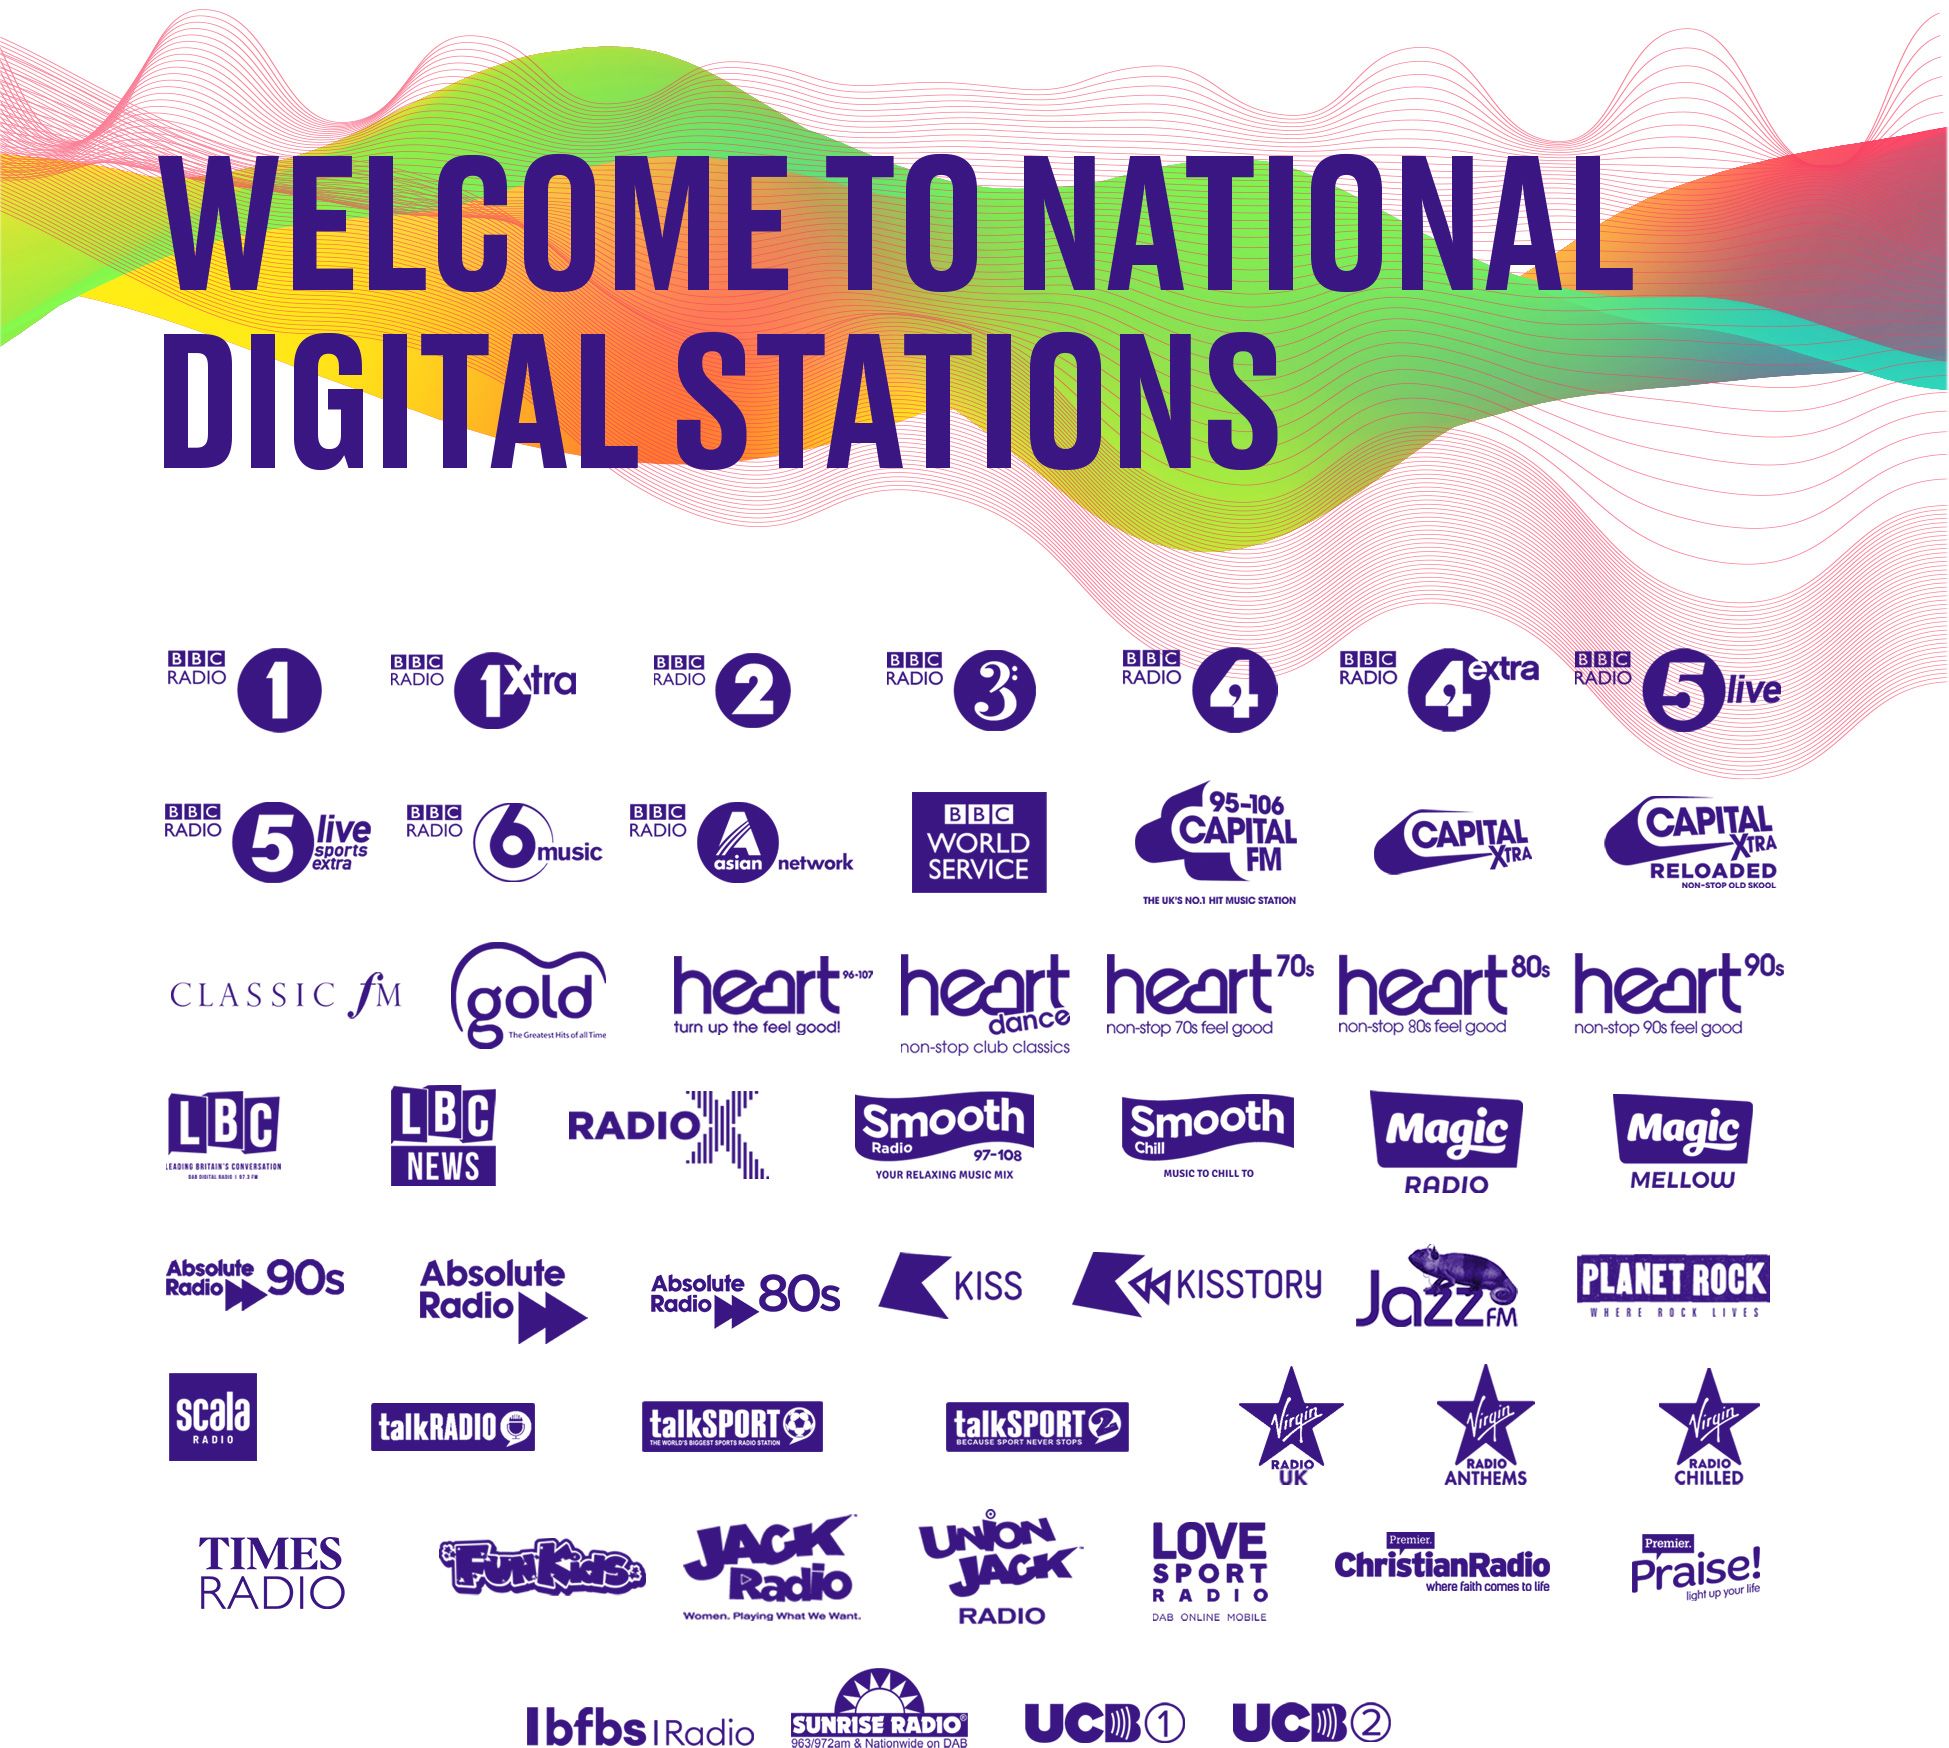 Welcome to national digital stations